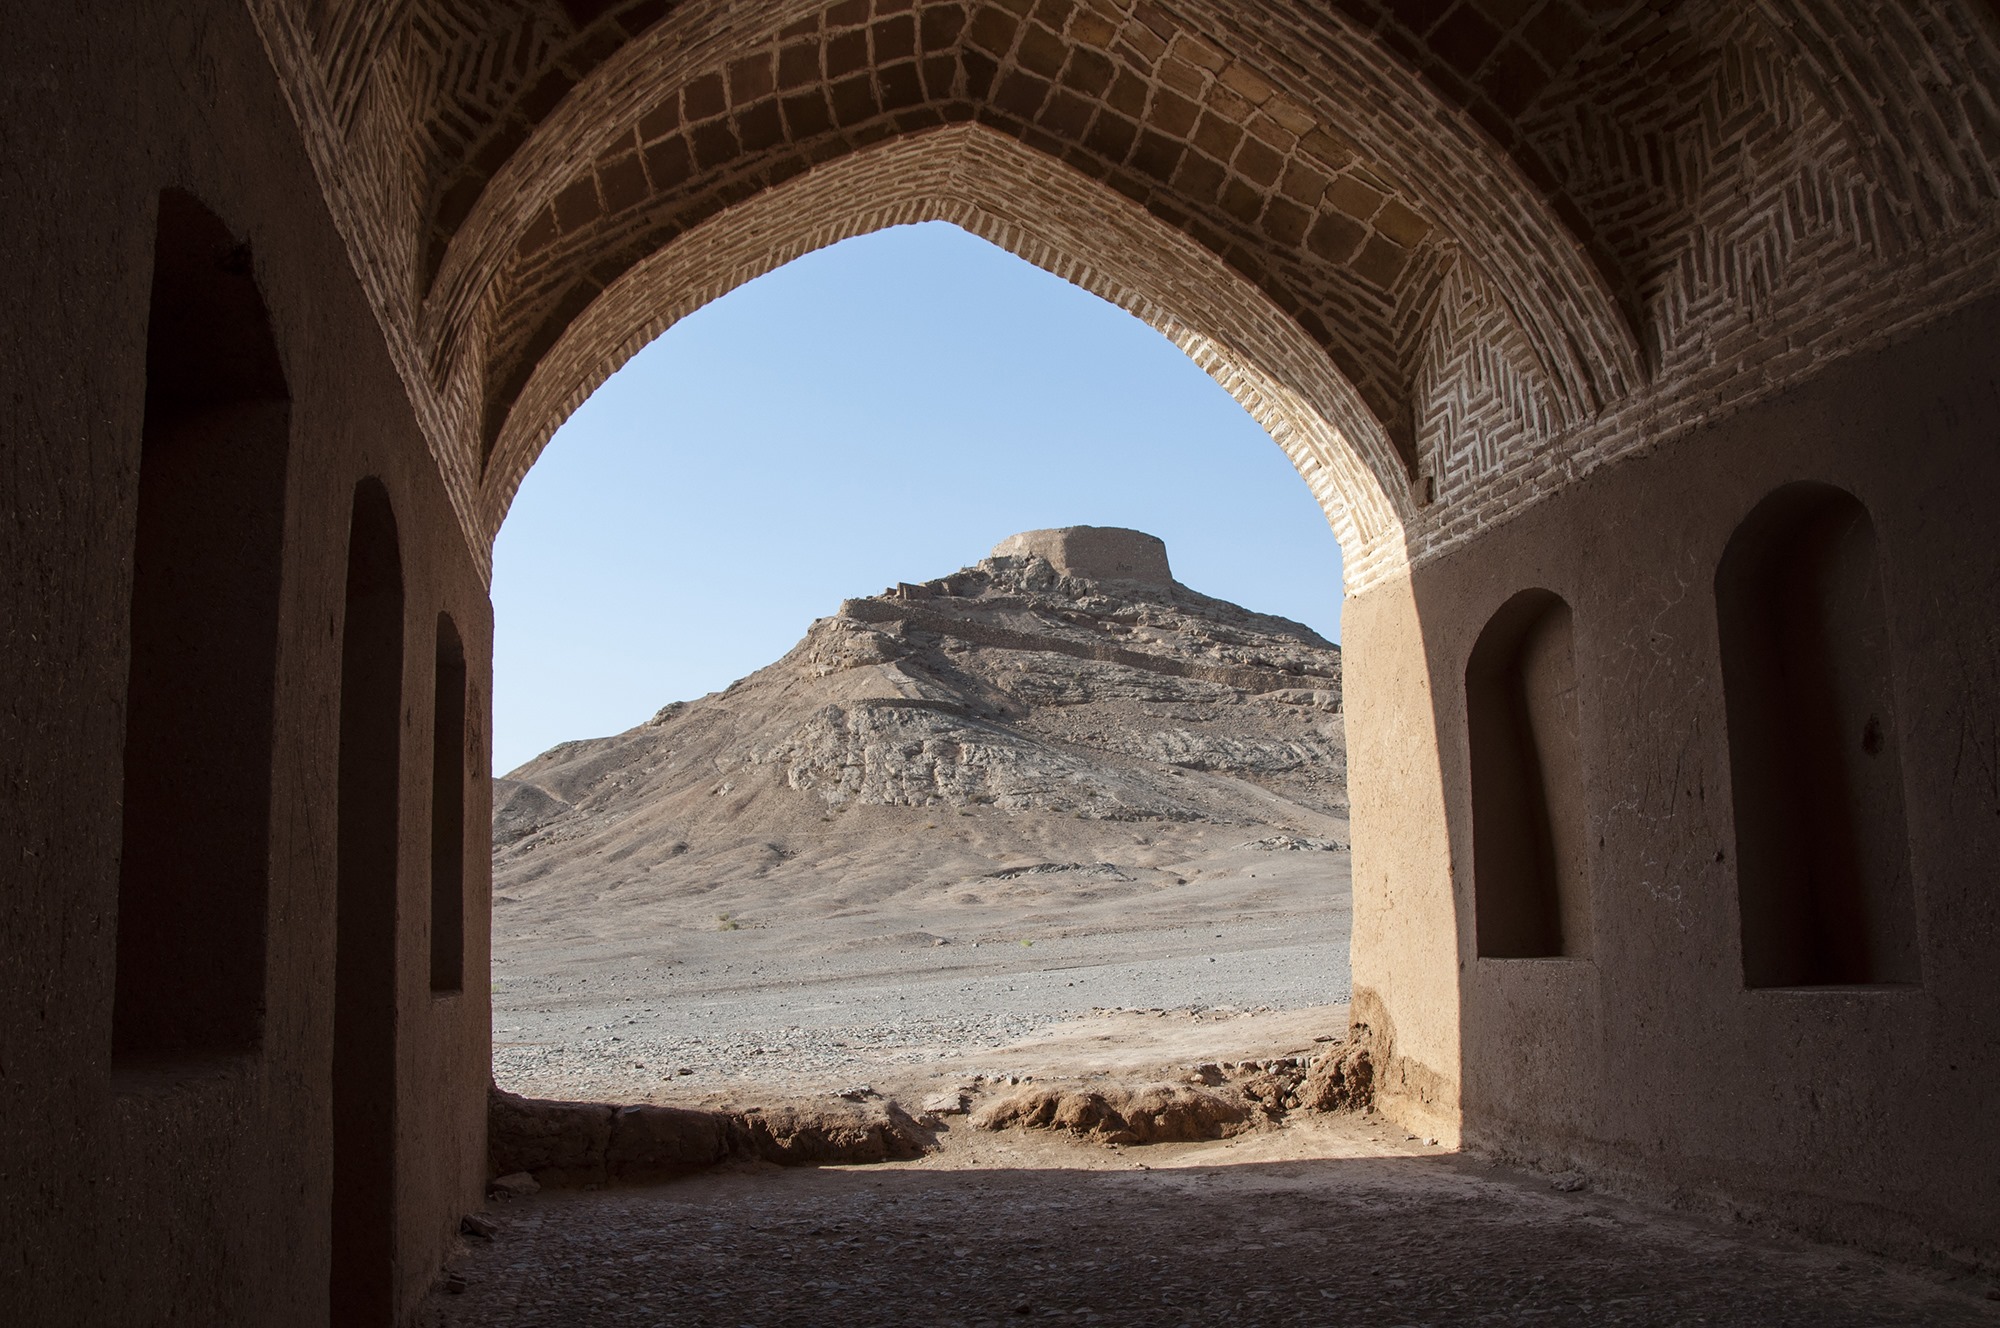 YAZD - Tower of Silence, inaccessible structure built by Zoroastrians for excarnation.